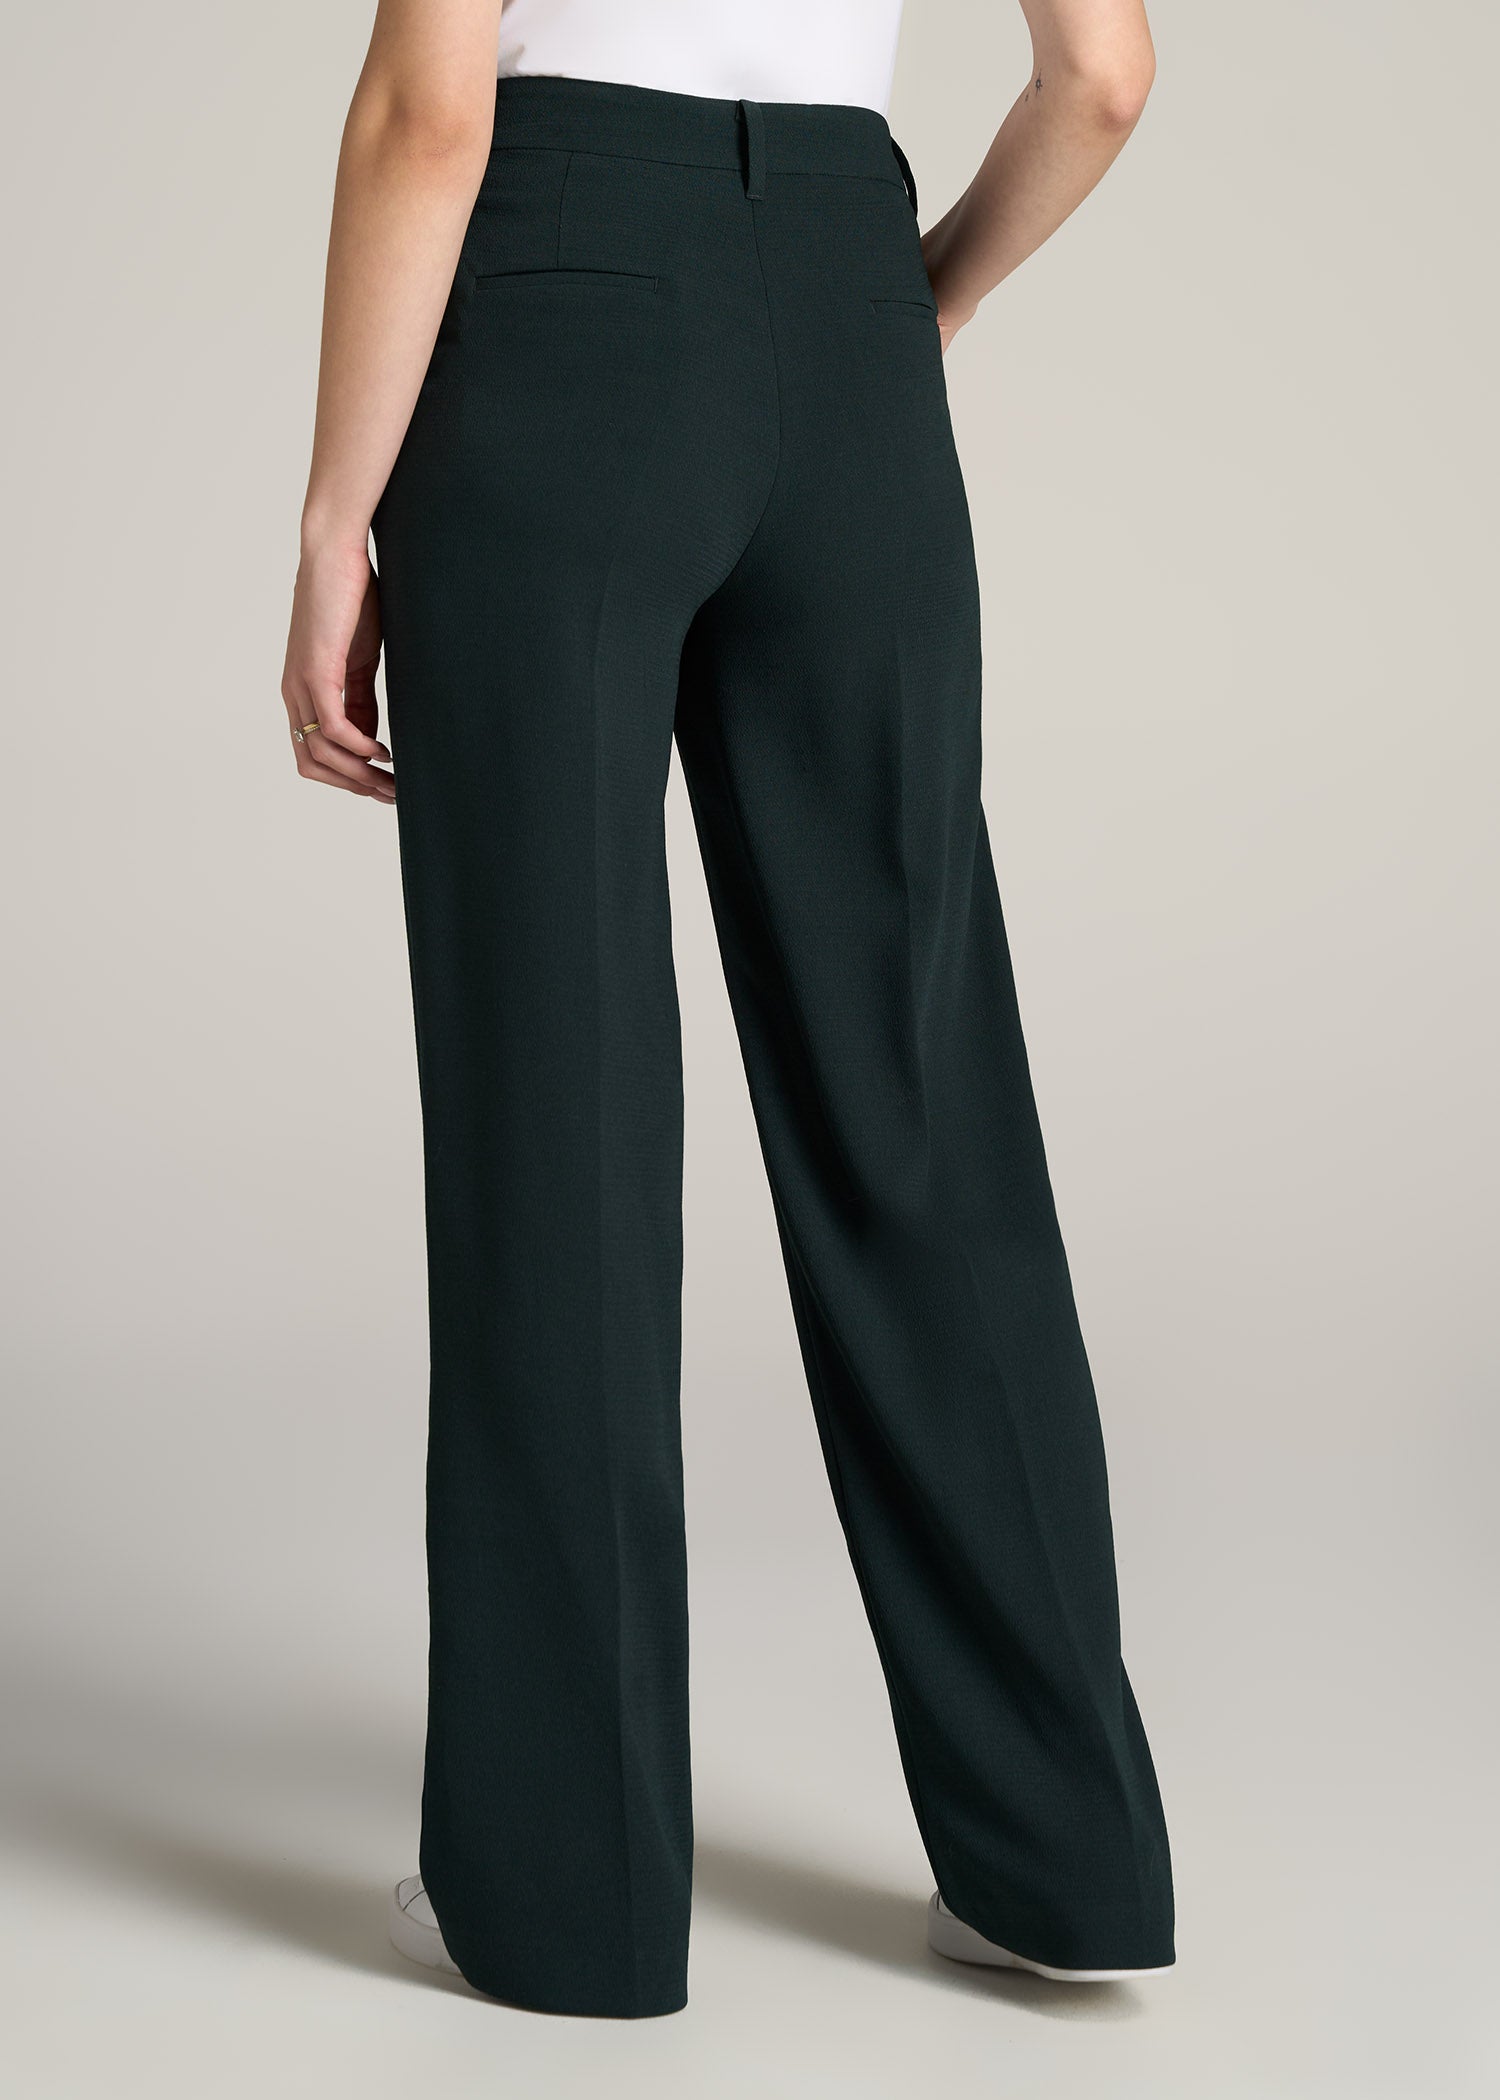 Amazon.com: Wide Leg Dress Pants for Women Elegant Trousers with Pocket  High Waist Work Business Pants Palazzo Pants (Green, M) : Sports & Outdoors